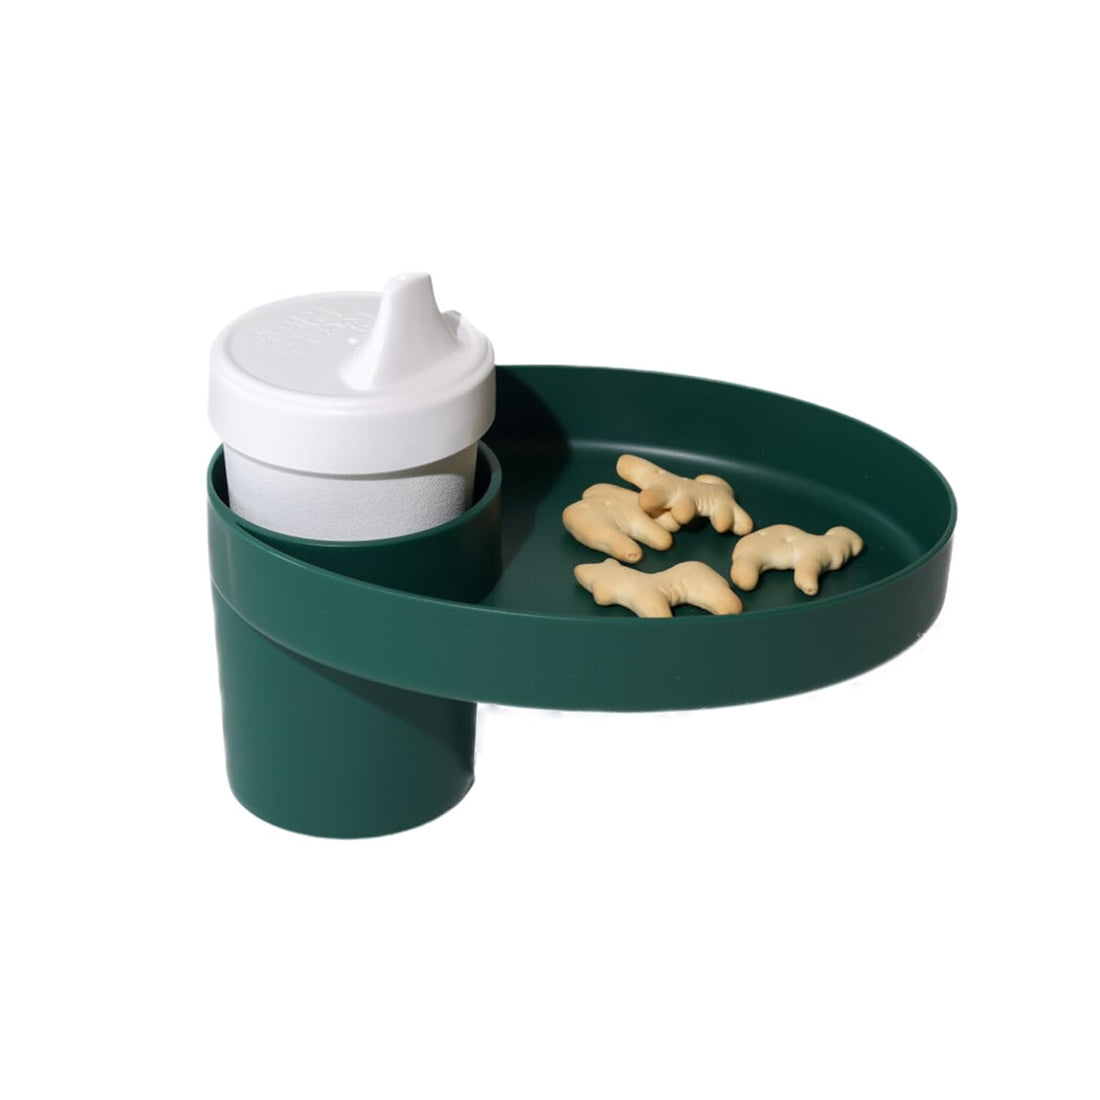 My Travel Tray Oval - USA Made. Extend Your Current Cup Holder to Hold Your Cup Plus a Tray for Snacks, Toys and Accessories. Enjoyed by Toddlers, Kids and Adults! (Racing Green)